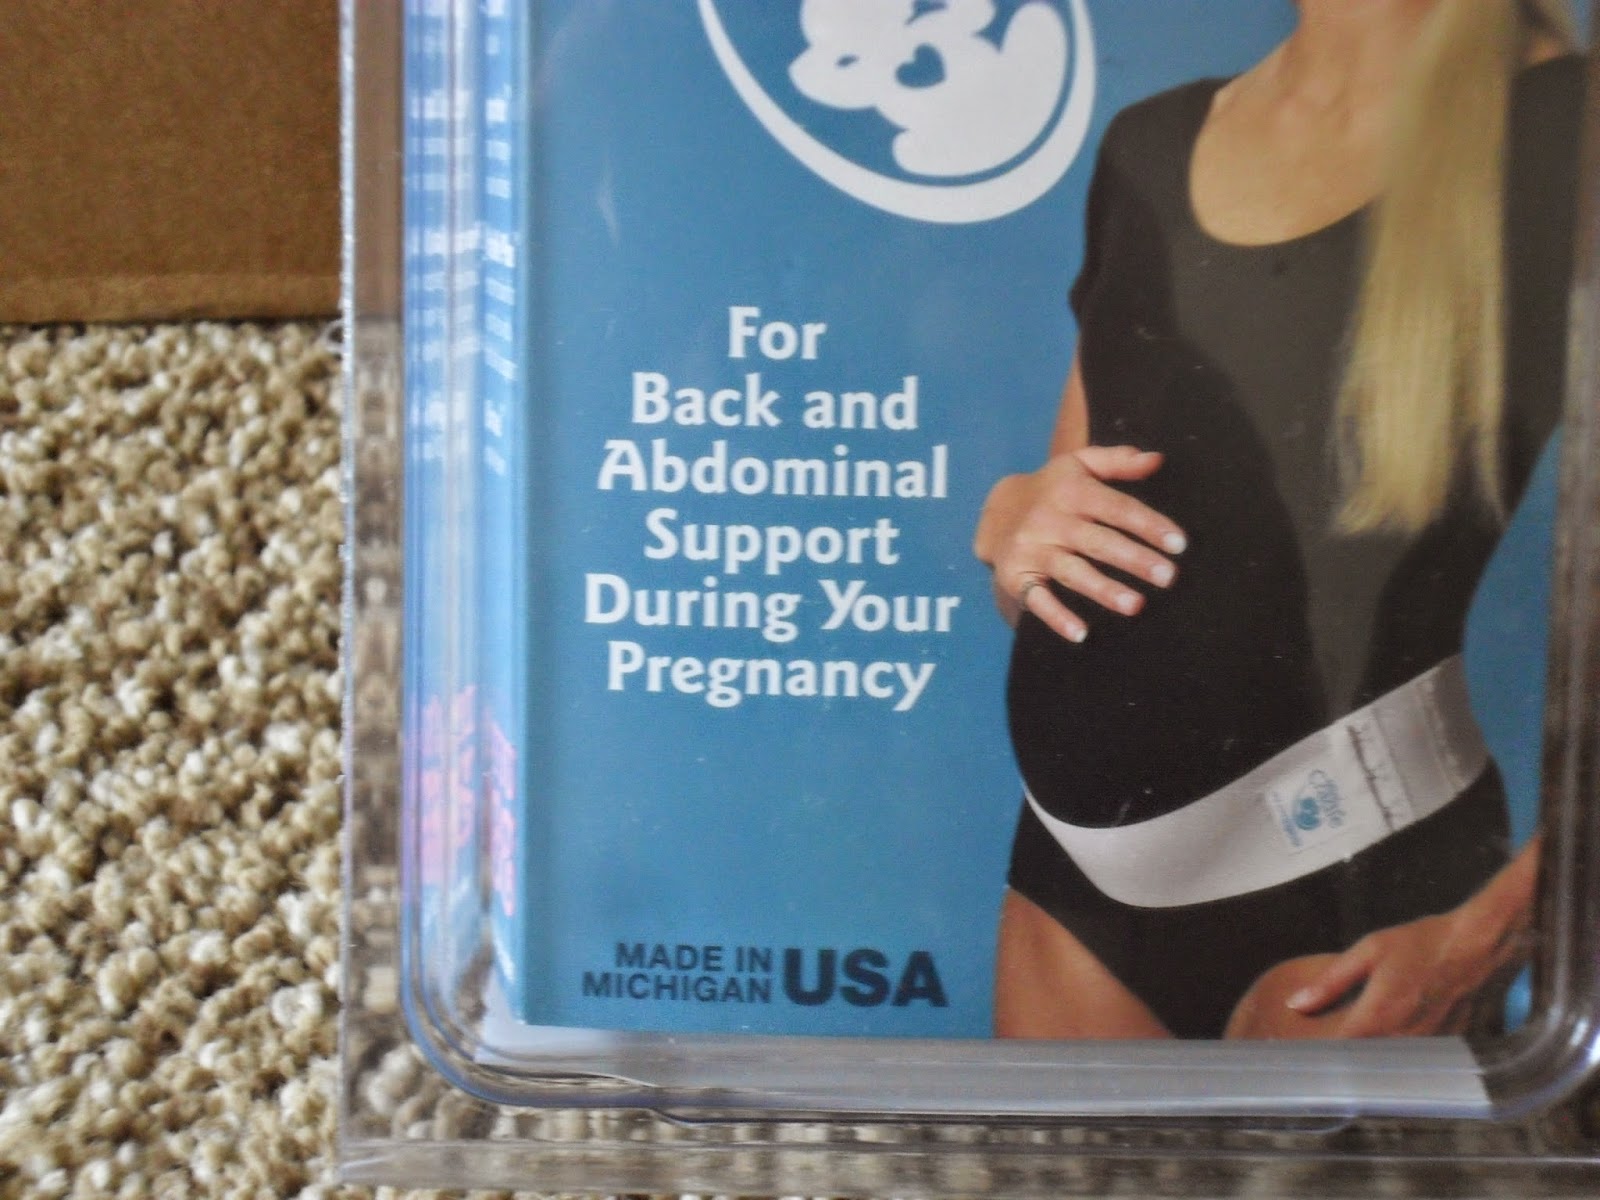 Pregnancy "ACHES" & It's You Babe, mini cradle.Review